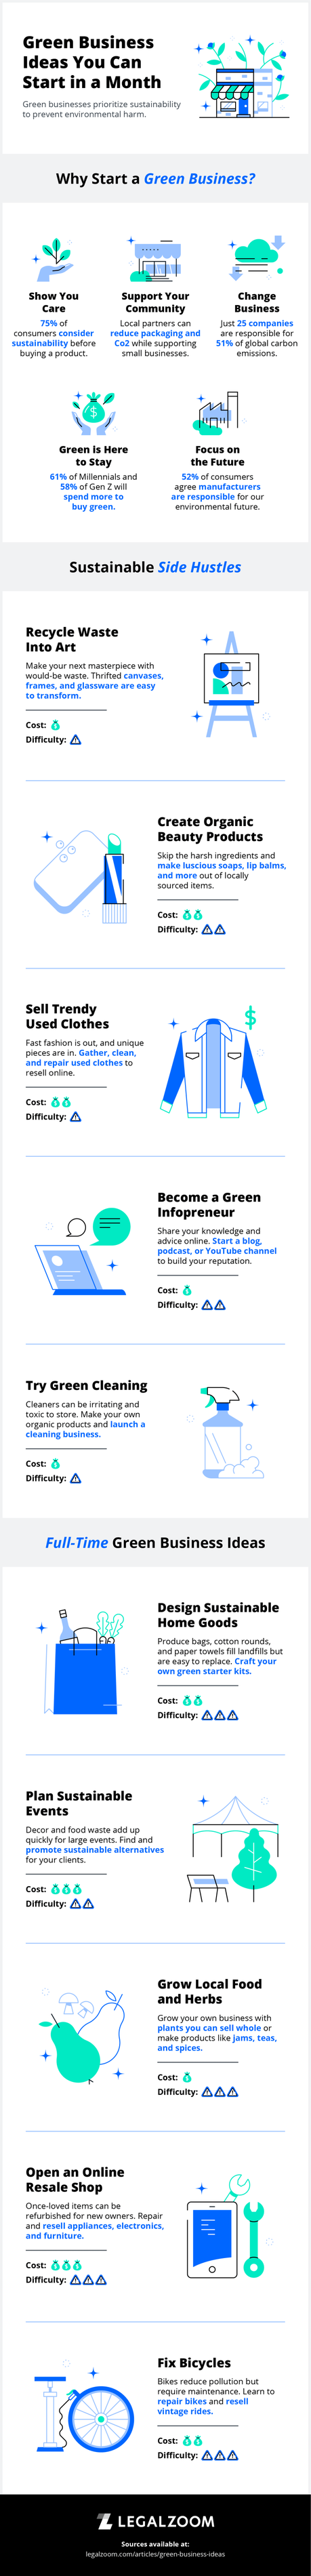 6 (Doable) Green Business Ideas You Can Start With (Infographic)